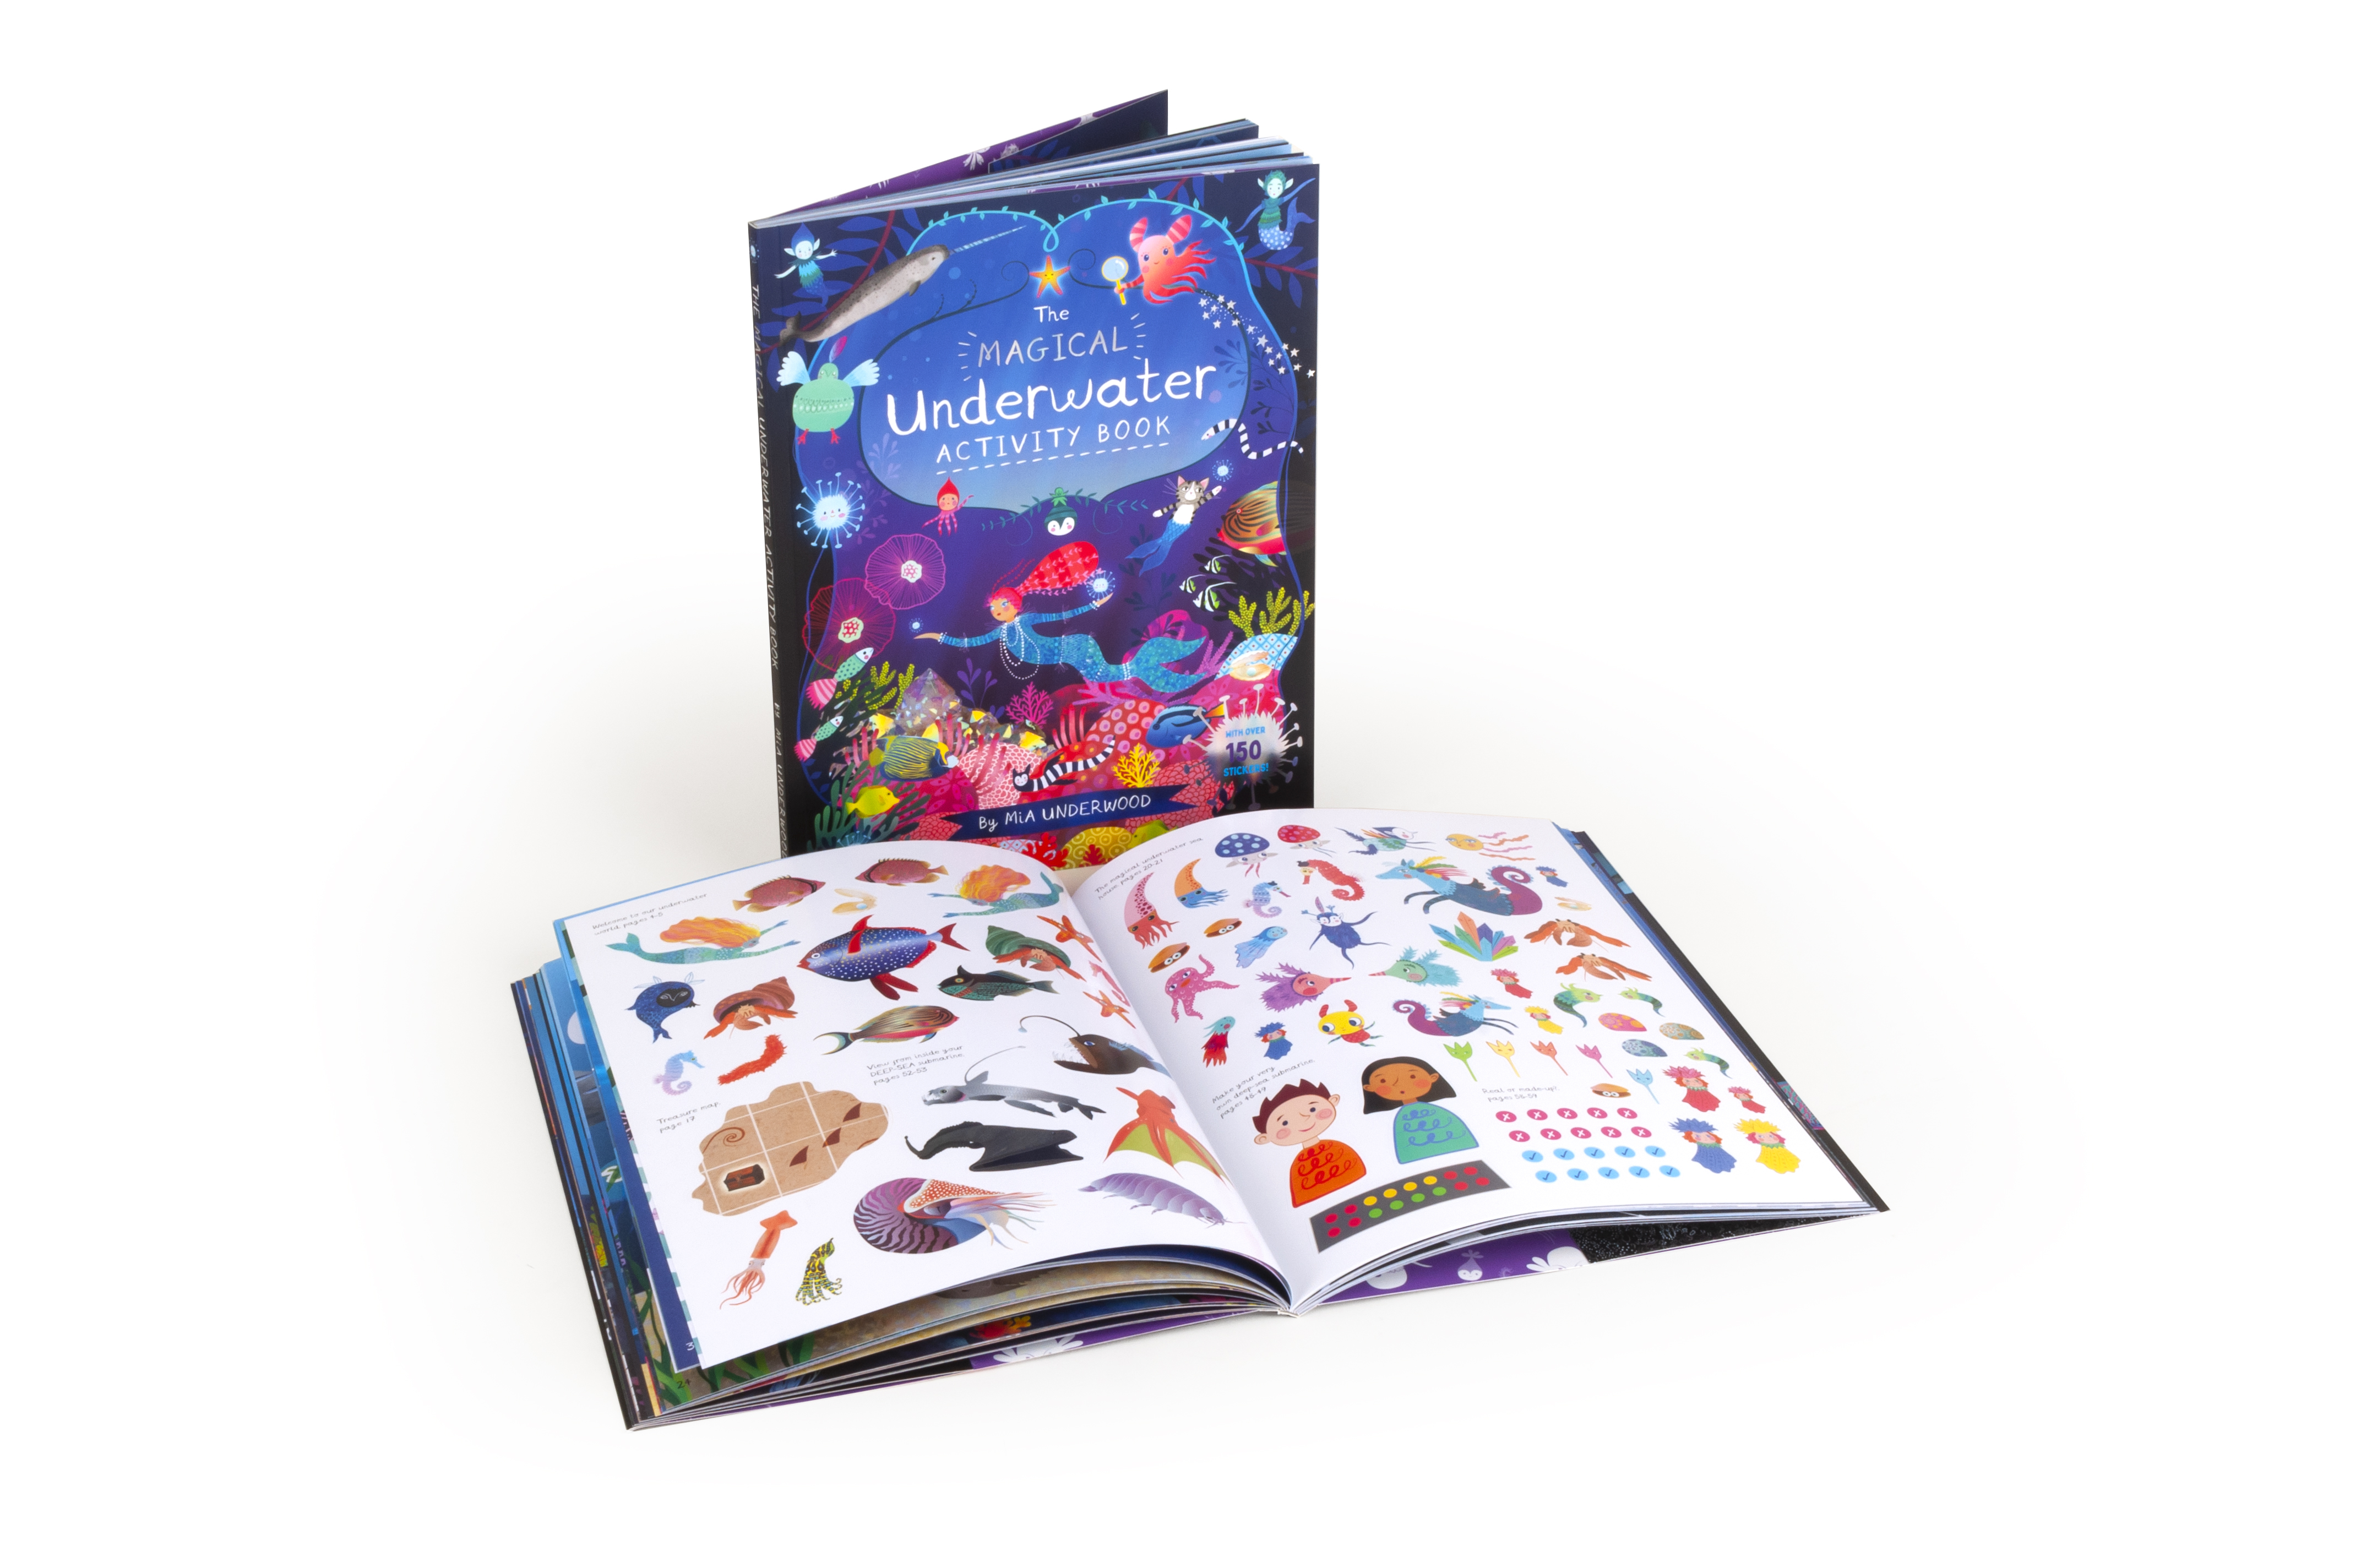 The Magical Underwater Activity Book, worth £9.99  image